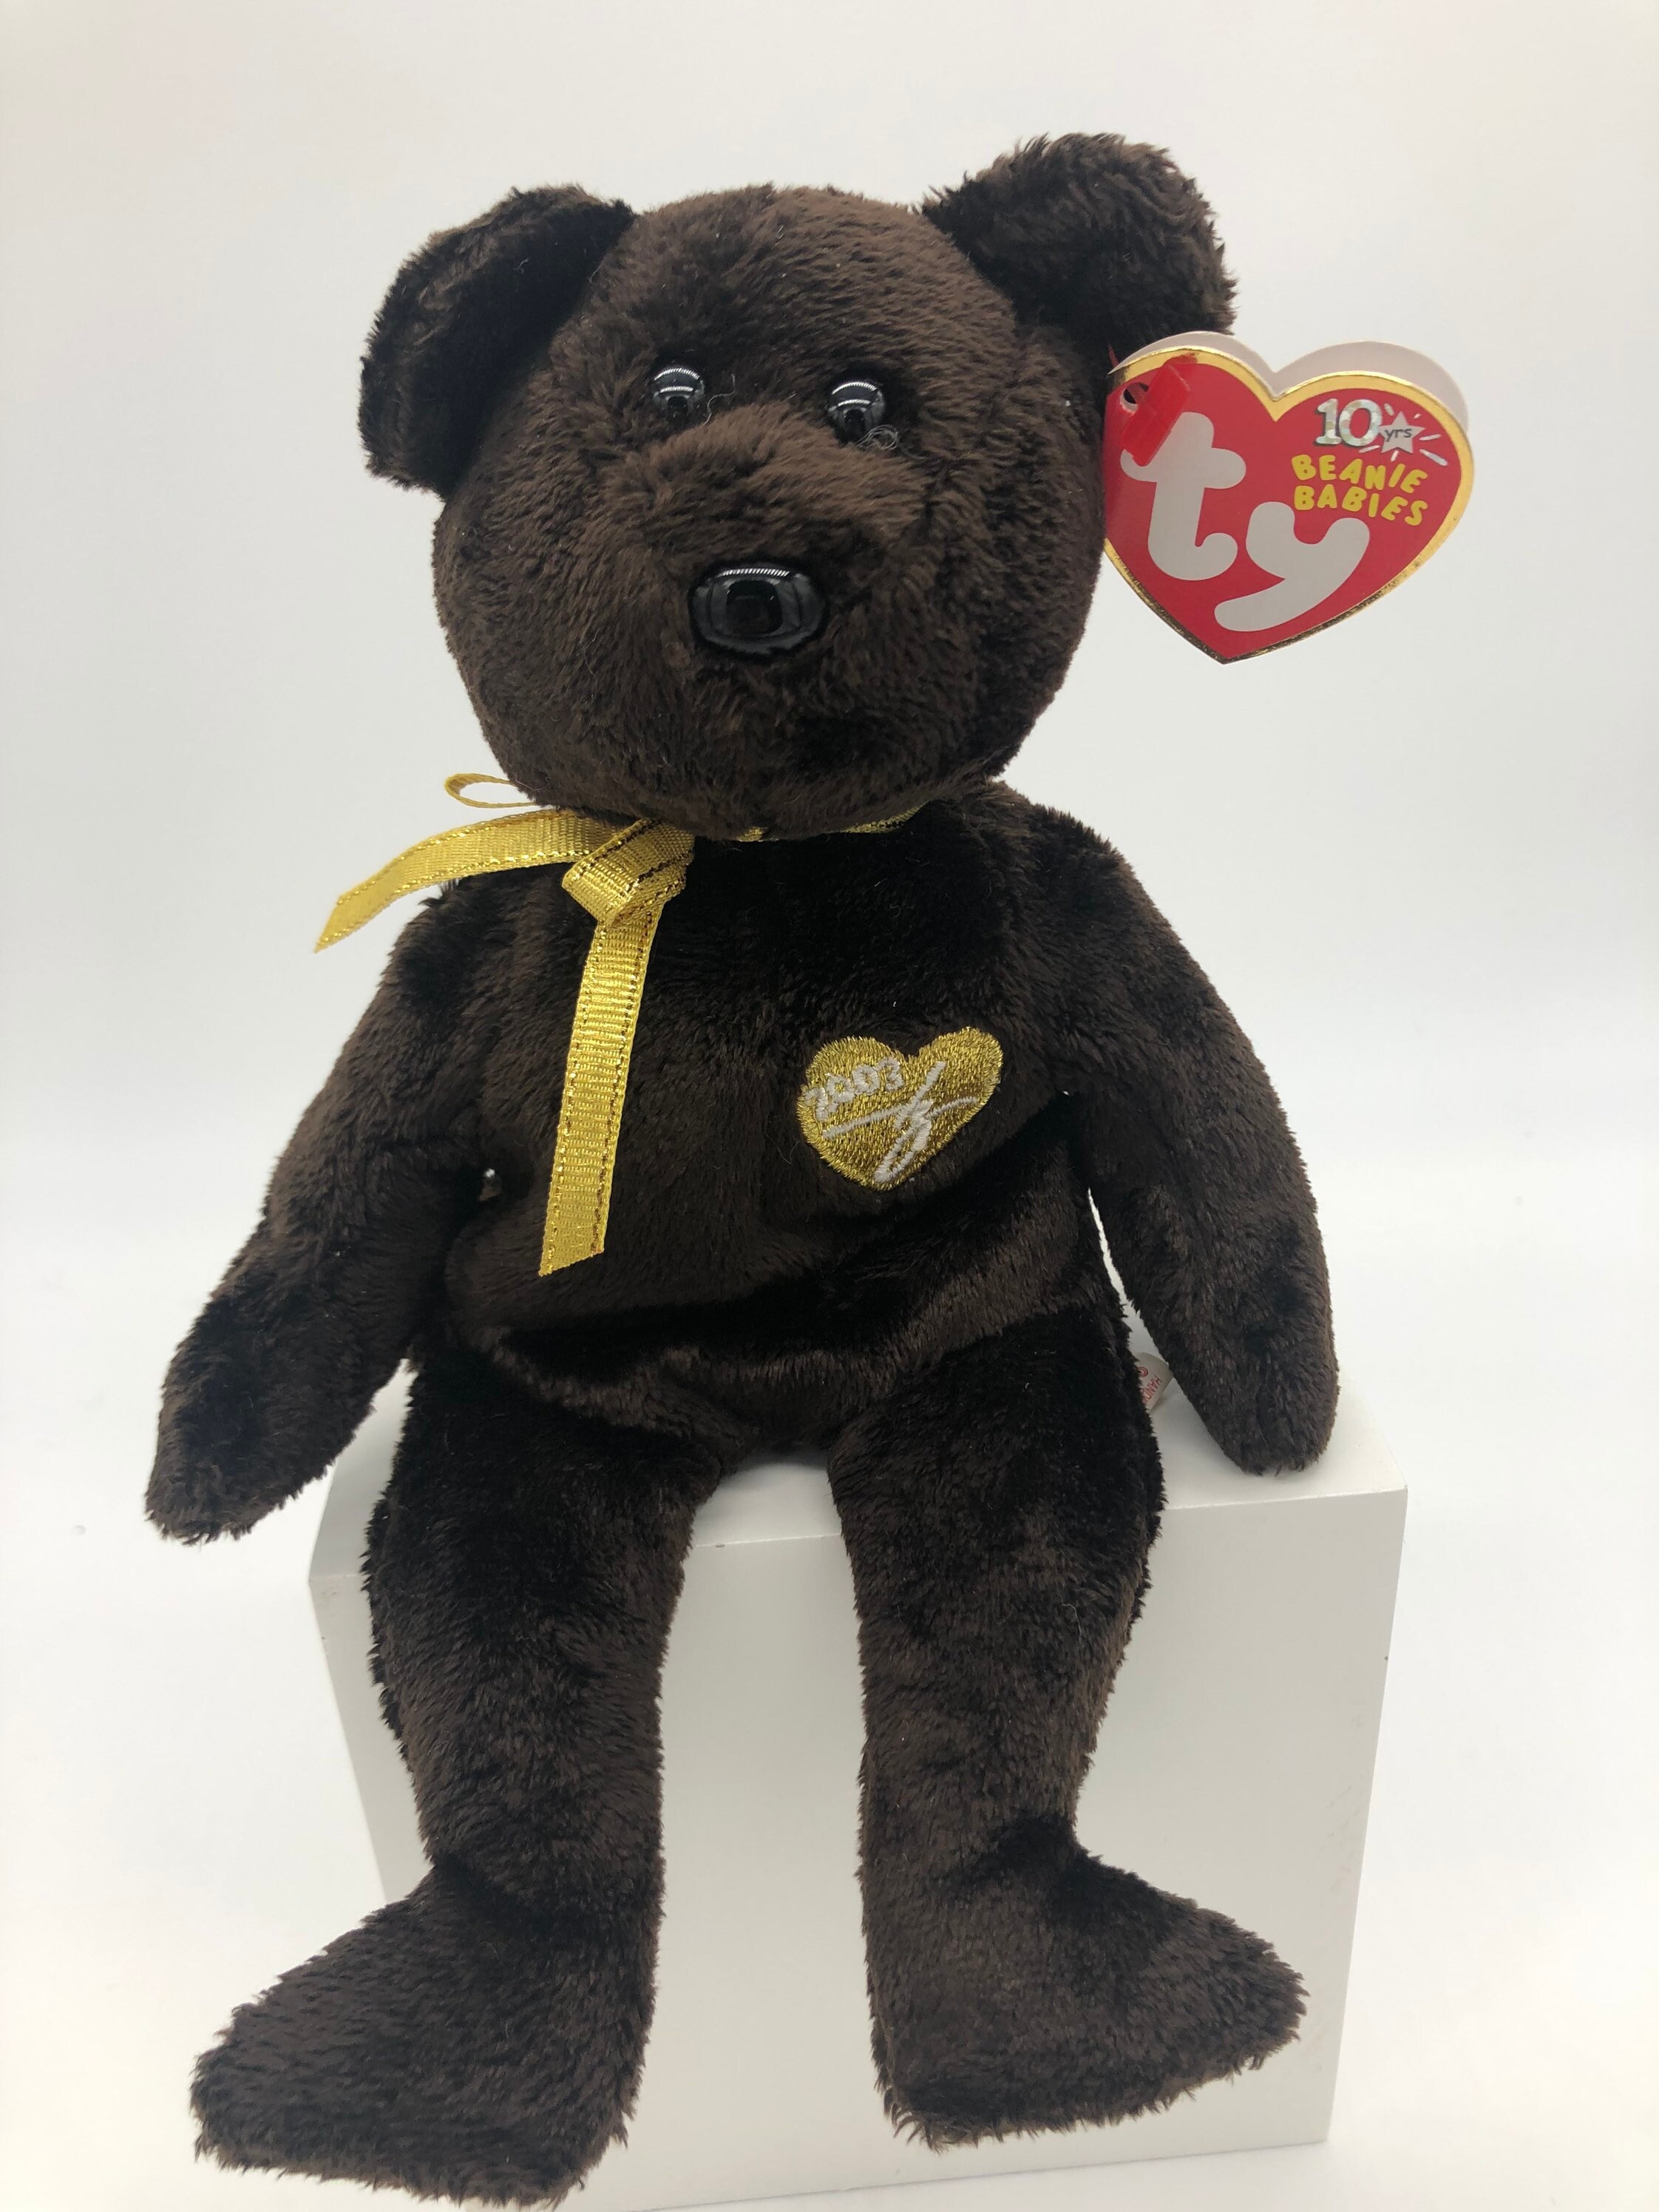 Ty Beanie Babies 2003 Signature Bear 11th Generation for sale online 